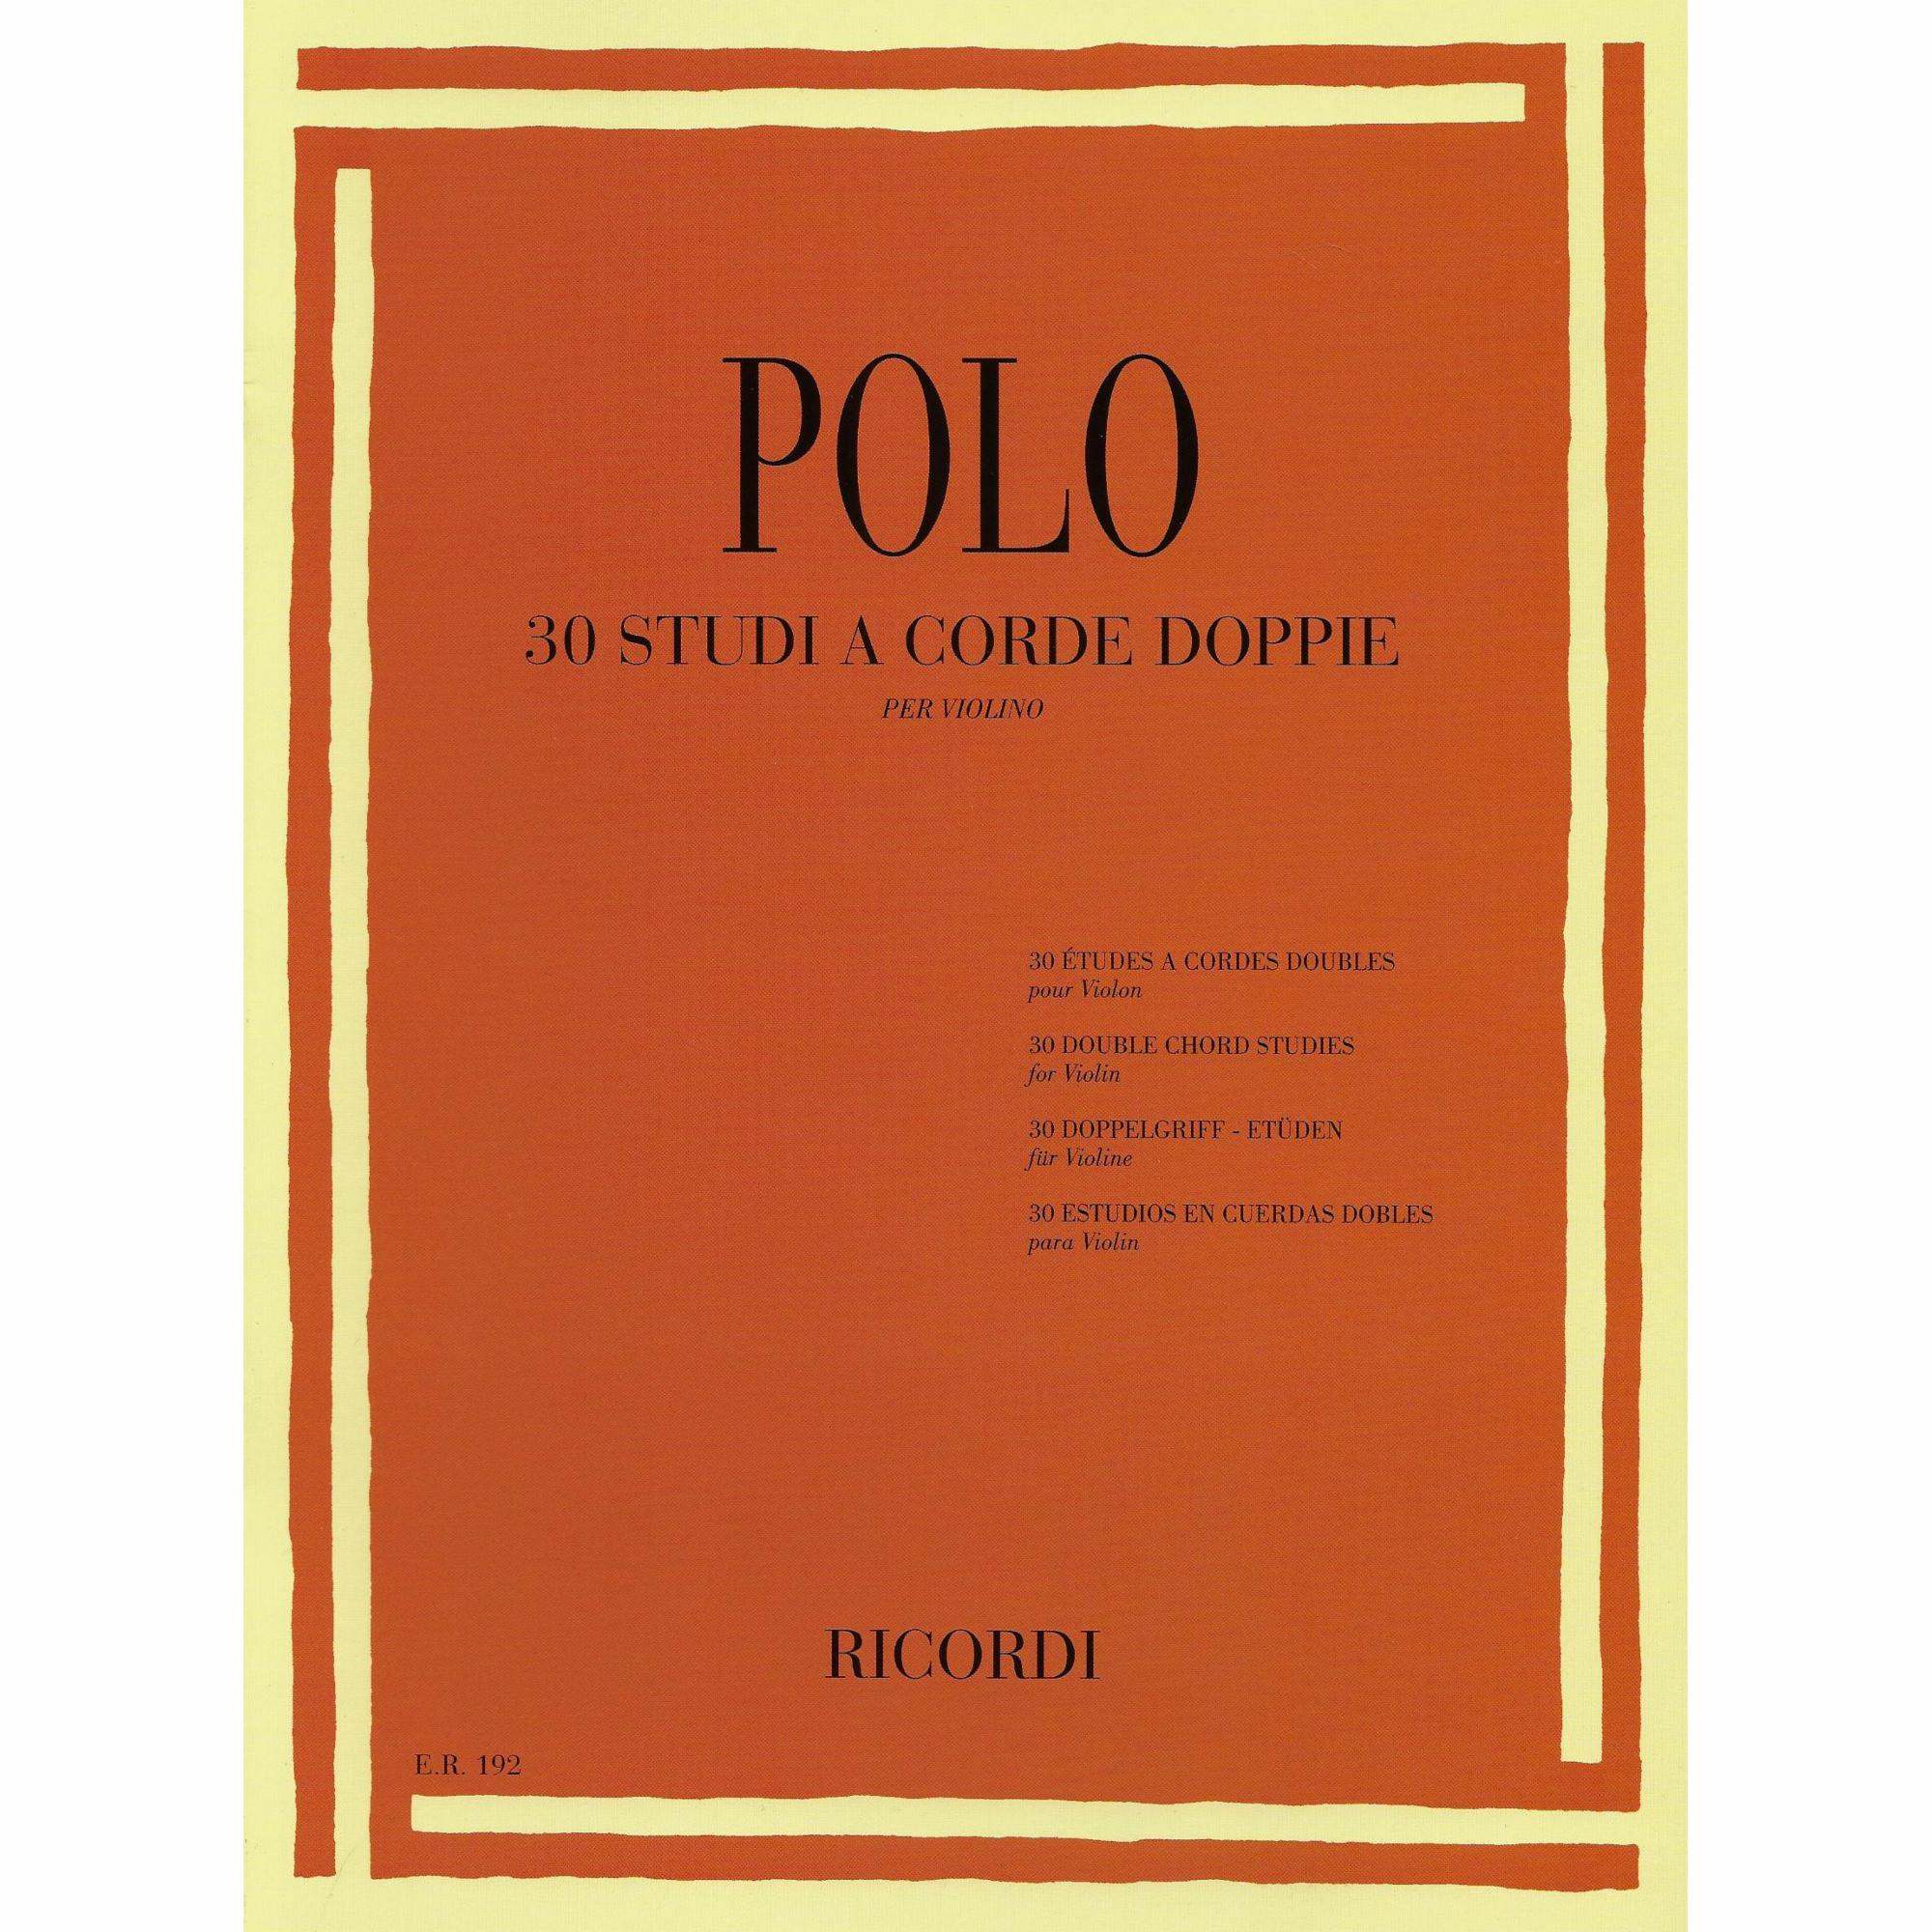 Polo -- 30 Double Chord Studies for Violin